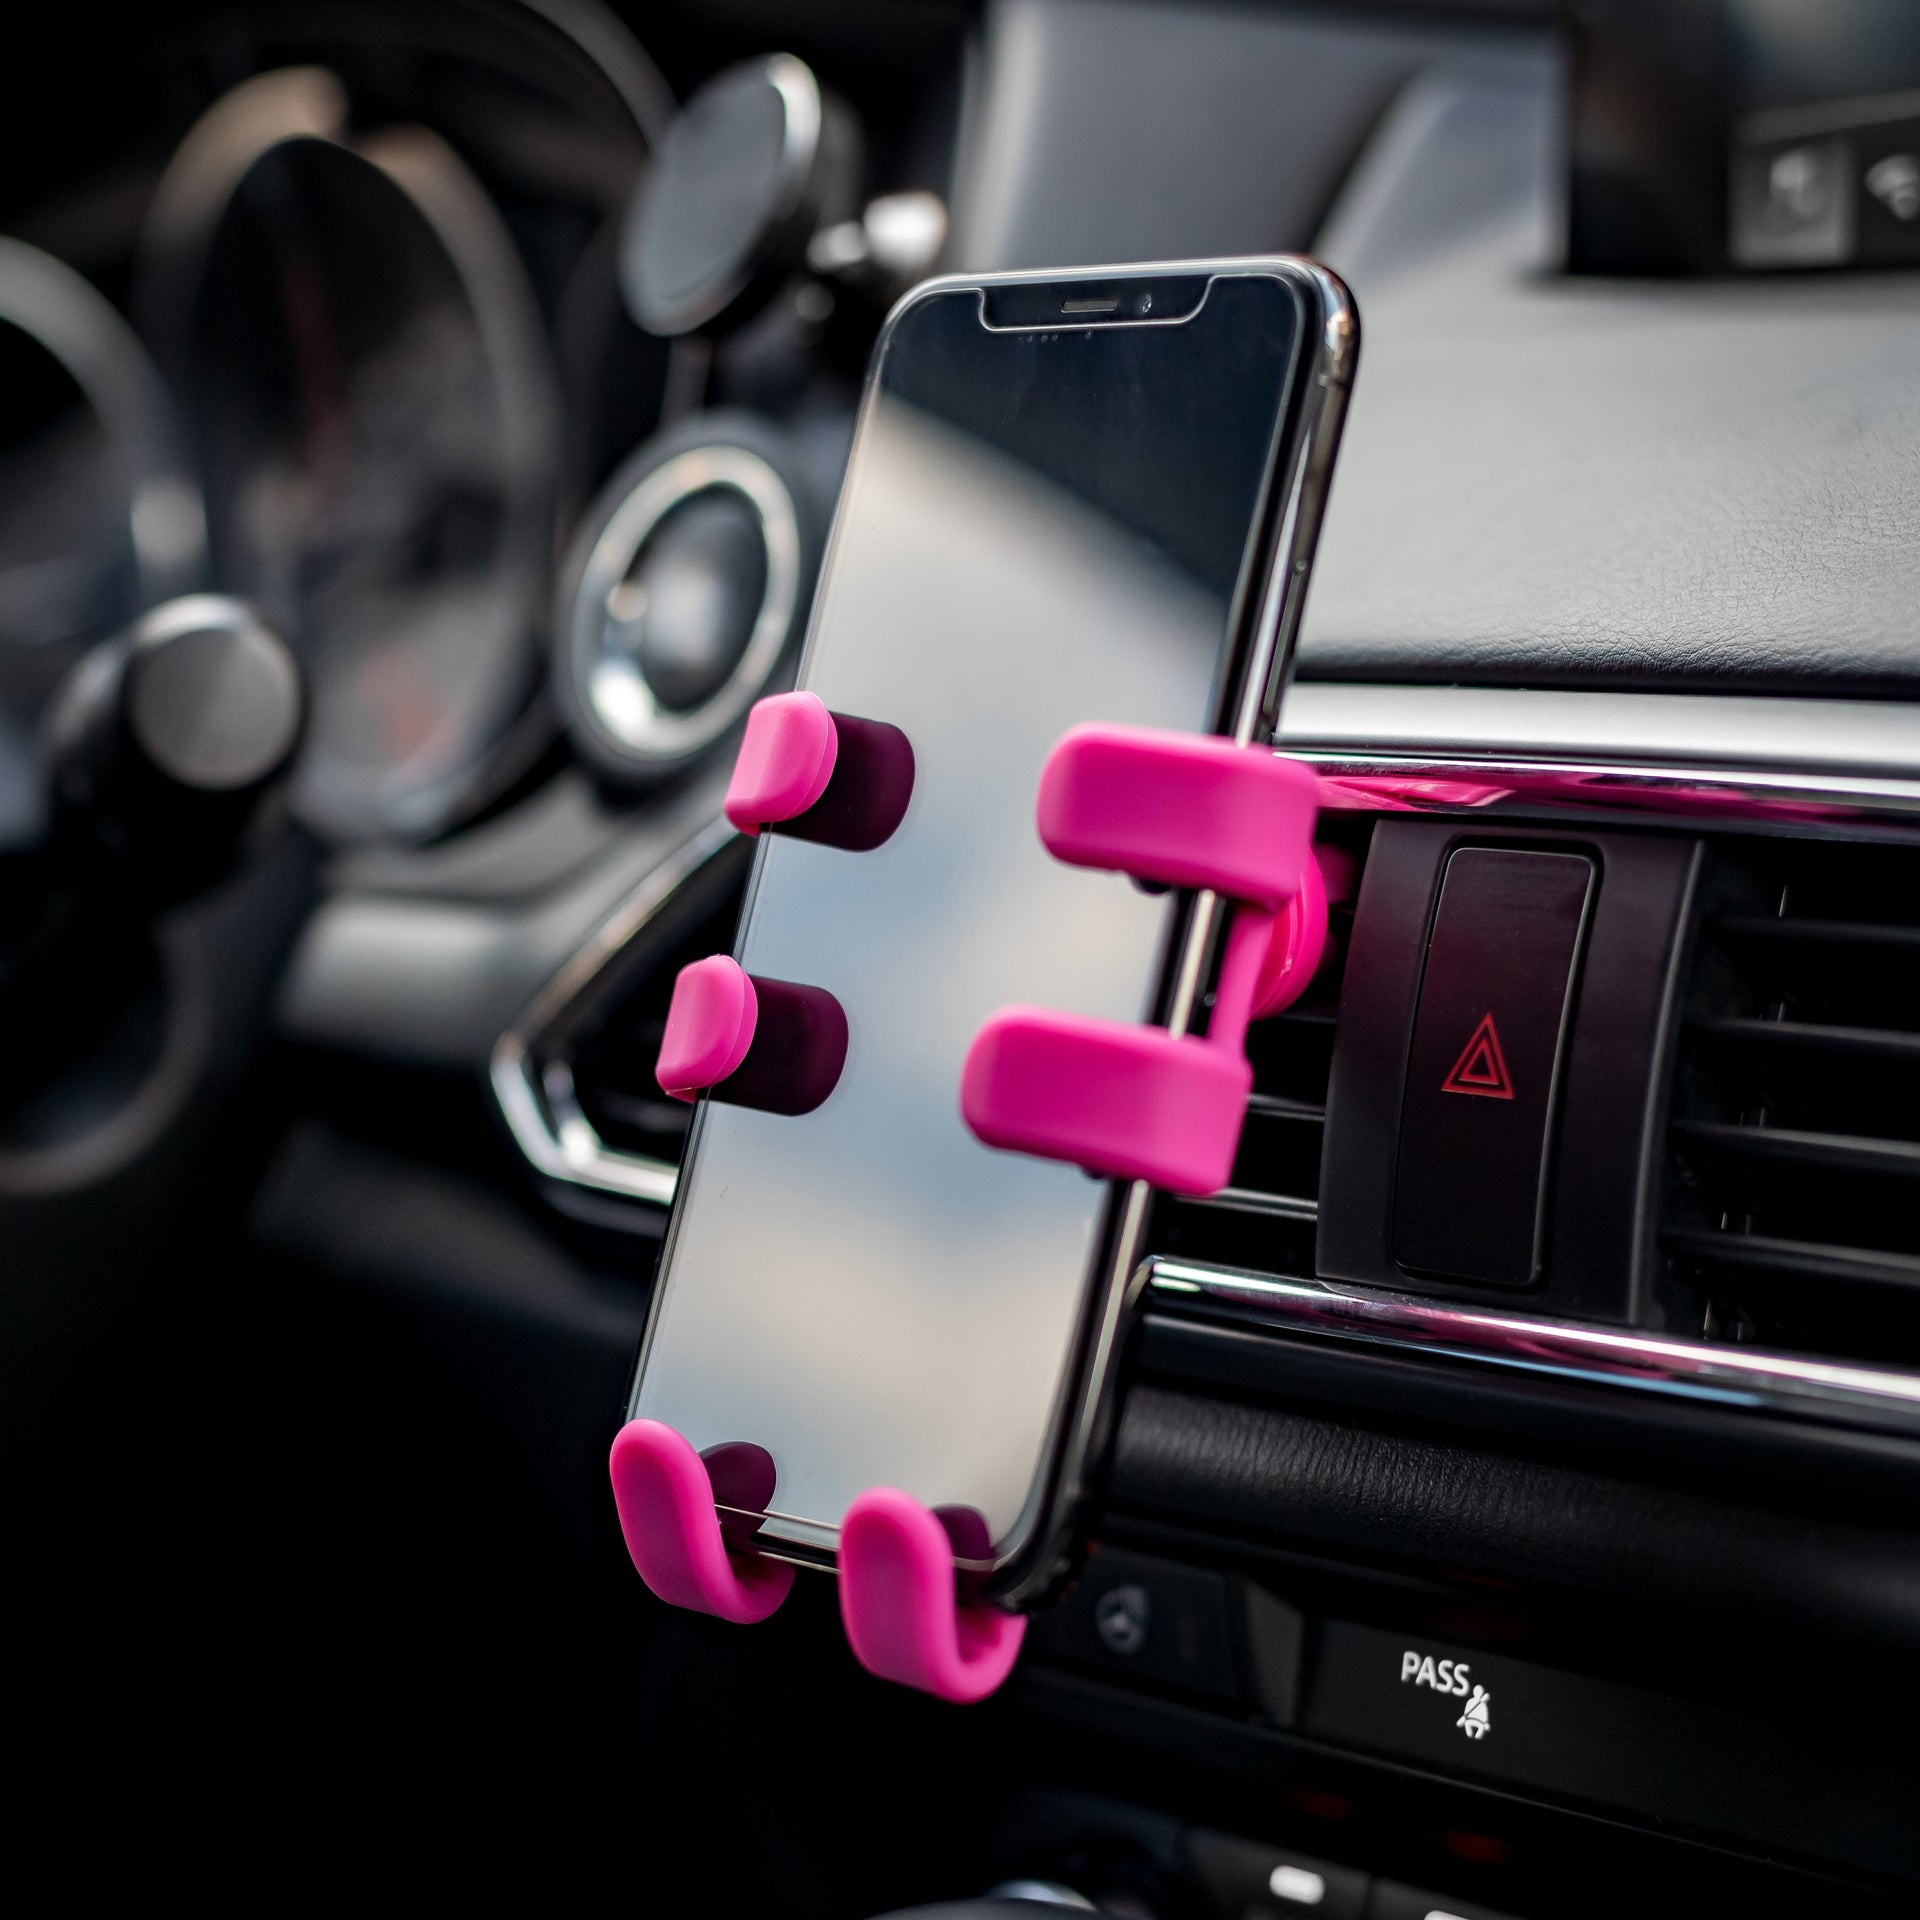 Image of OG Pink Hug Buddy holding a cell phone while attached to a vehicle air vent